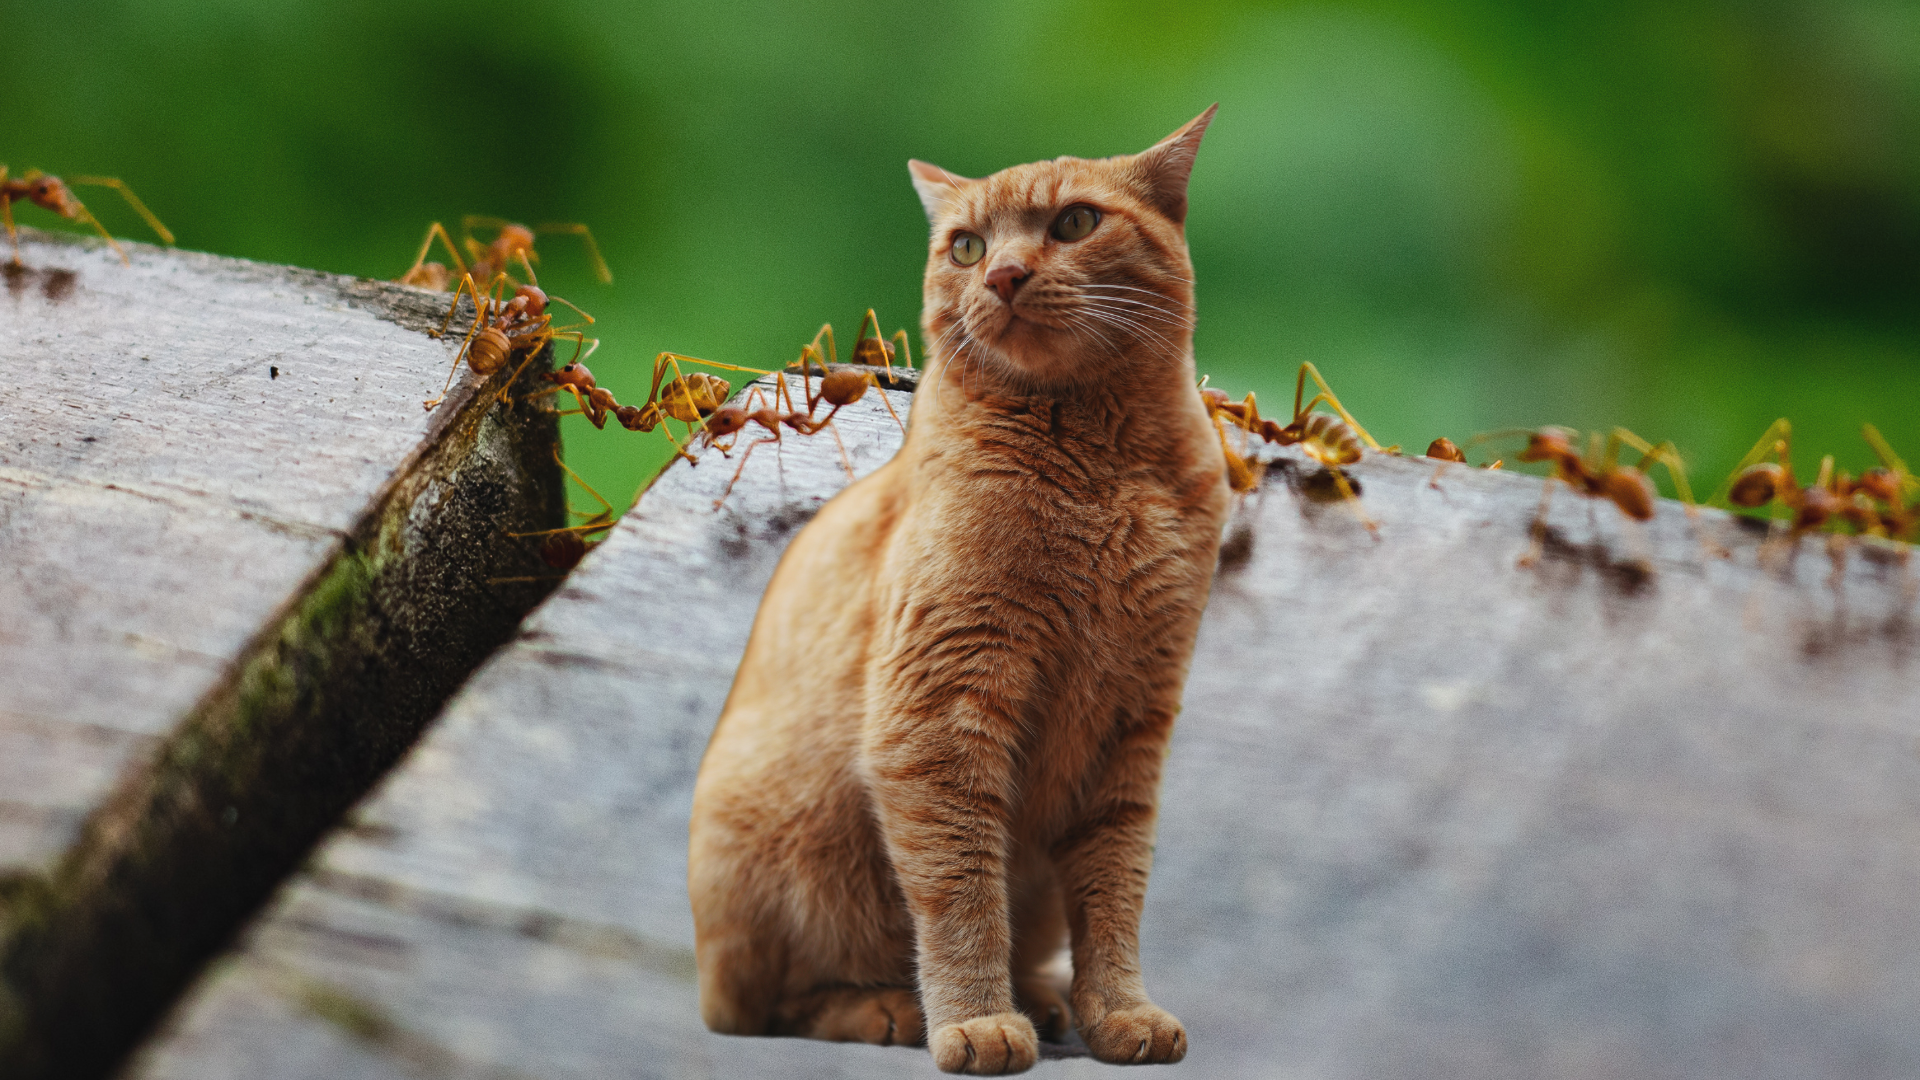 Can cats eat ants?